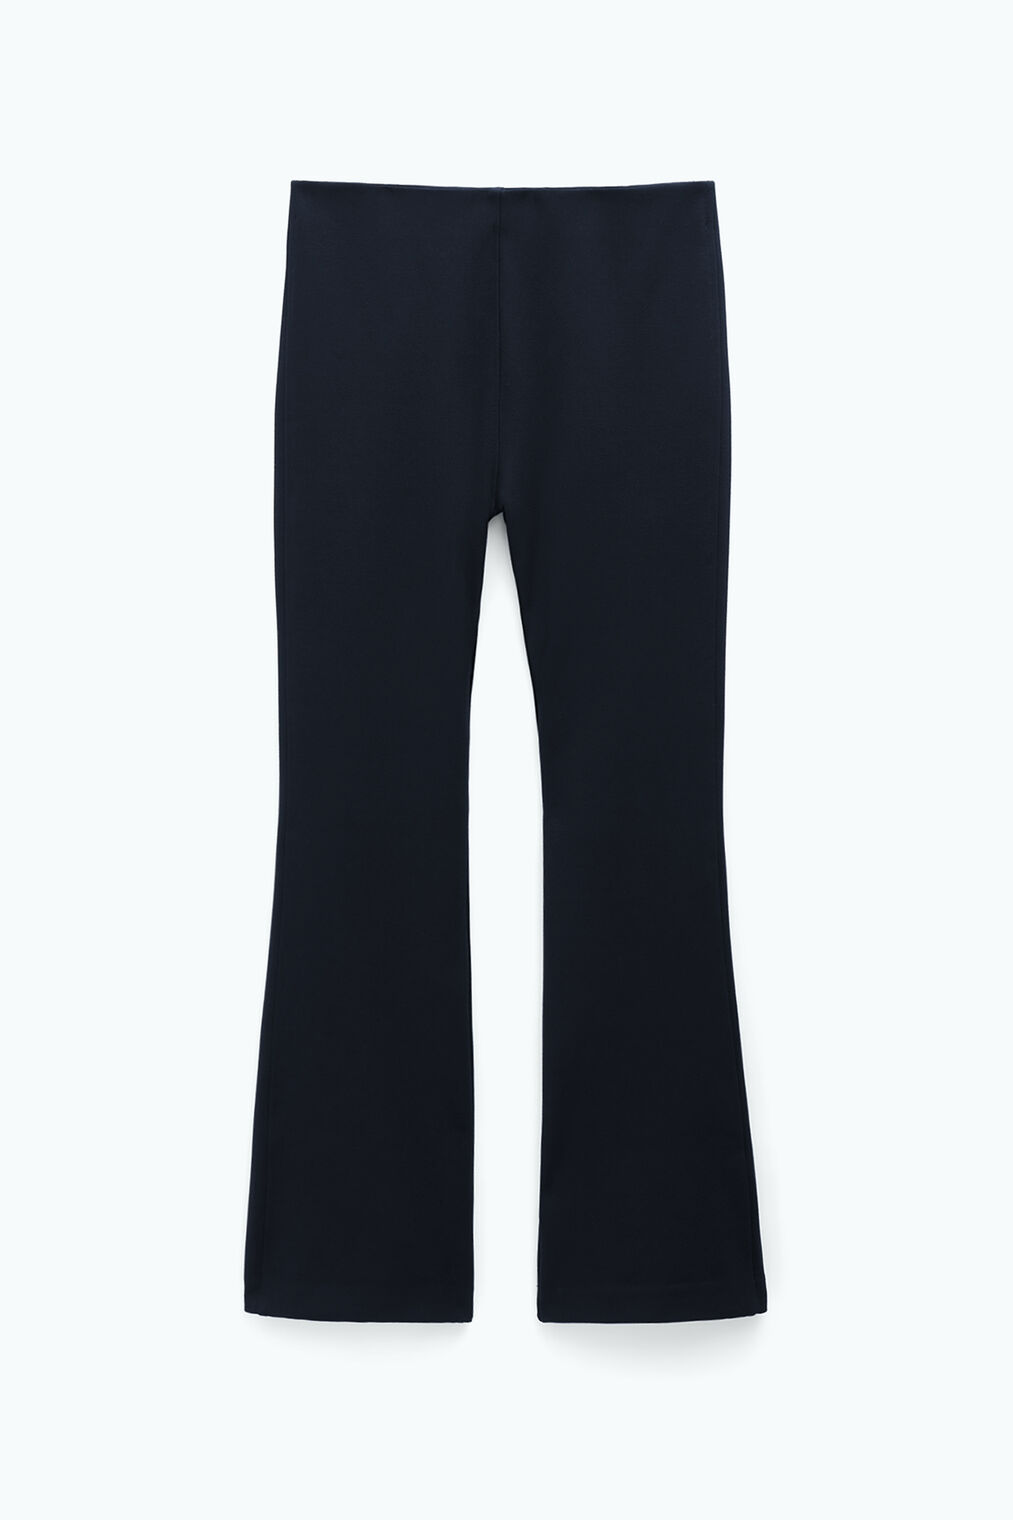 Flared jersey trousers in black